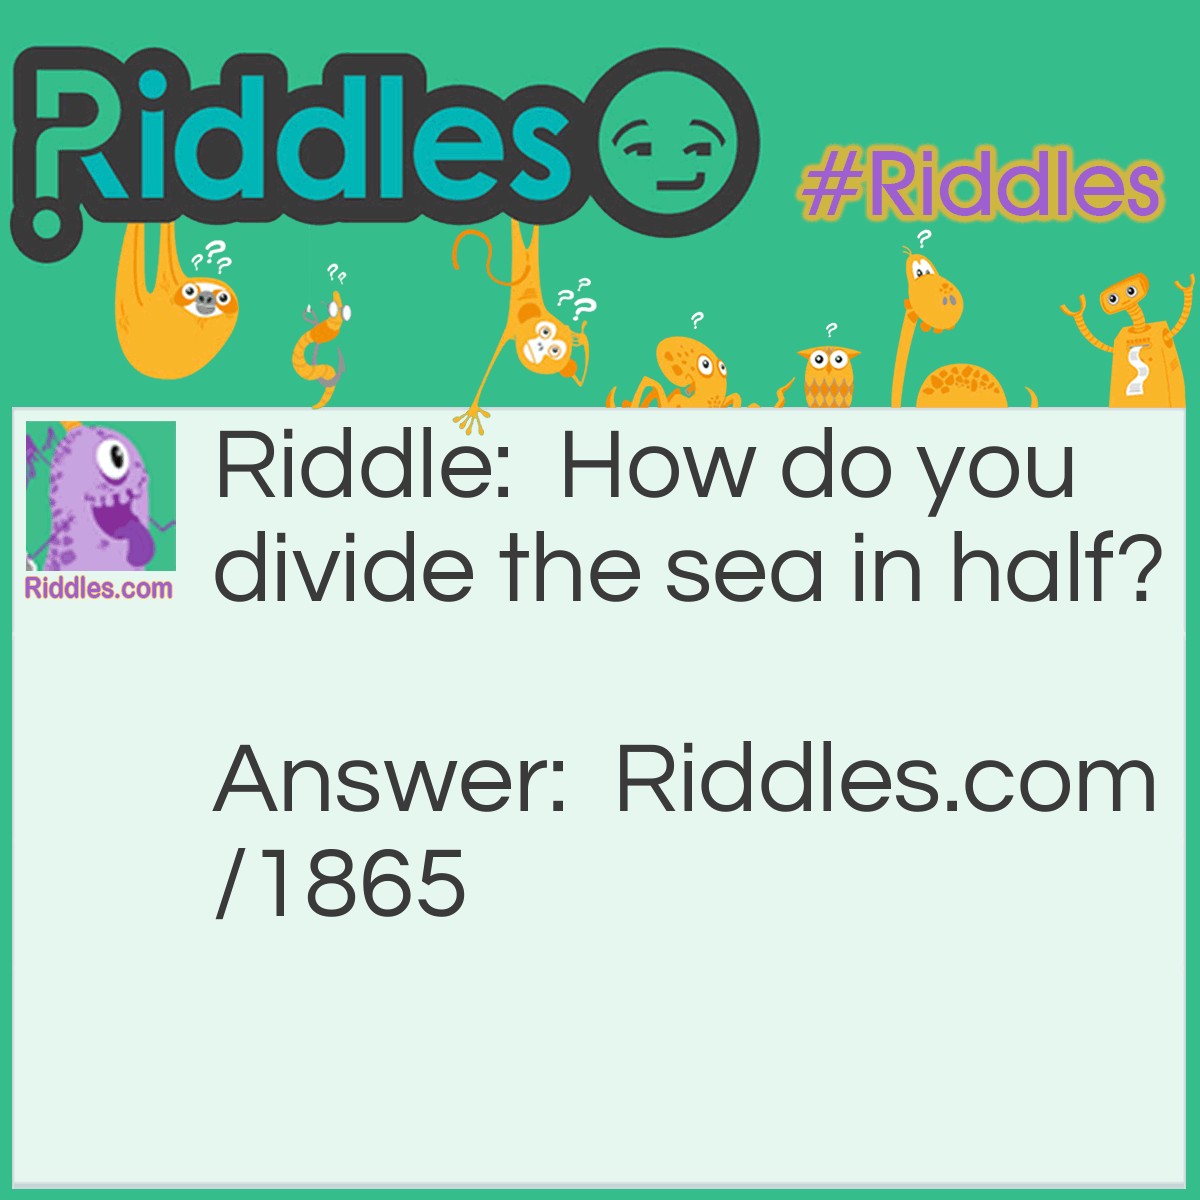 Riddle: How do you divide the sea in half? Answer: With a sea saw.